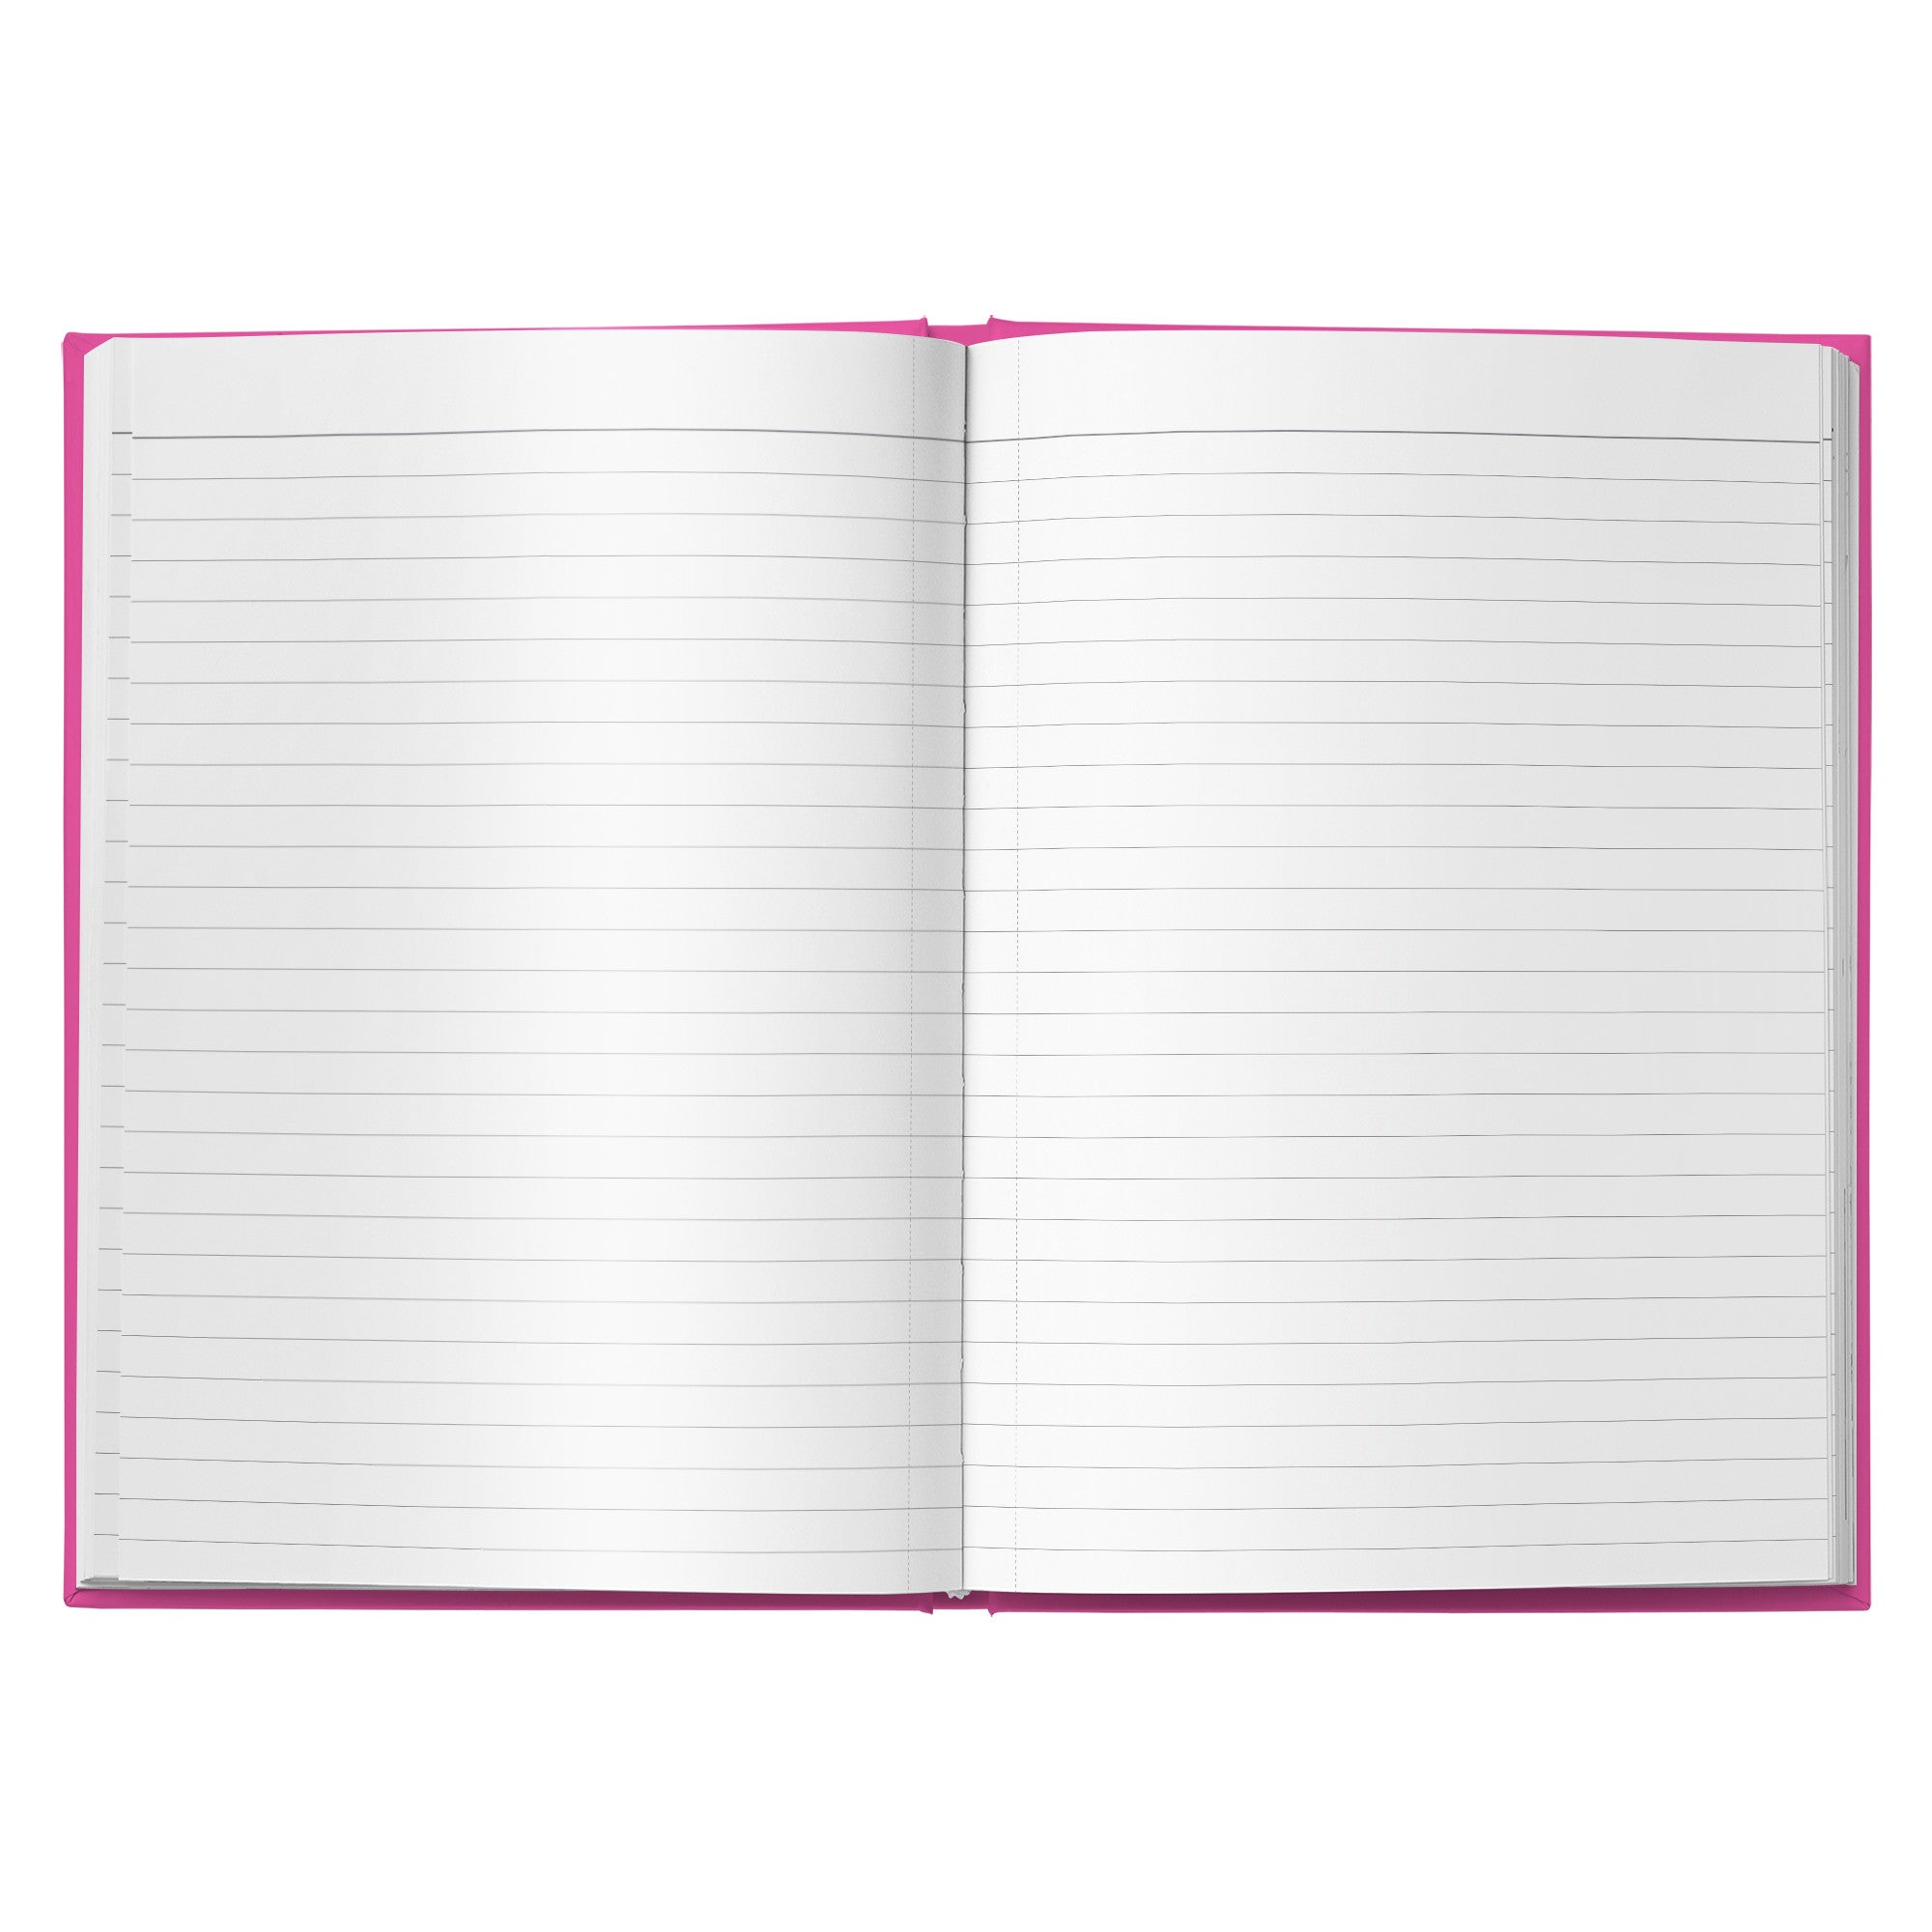 You Can Breast Cancer Awareness Hardcover Journal & Notebook - The Kindness Cause